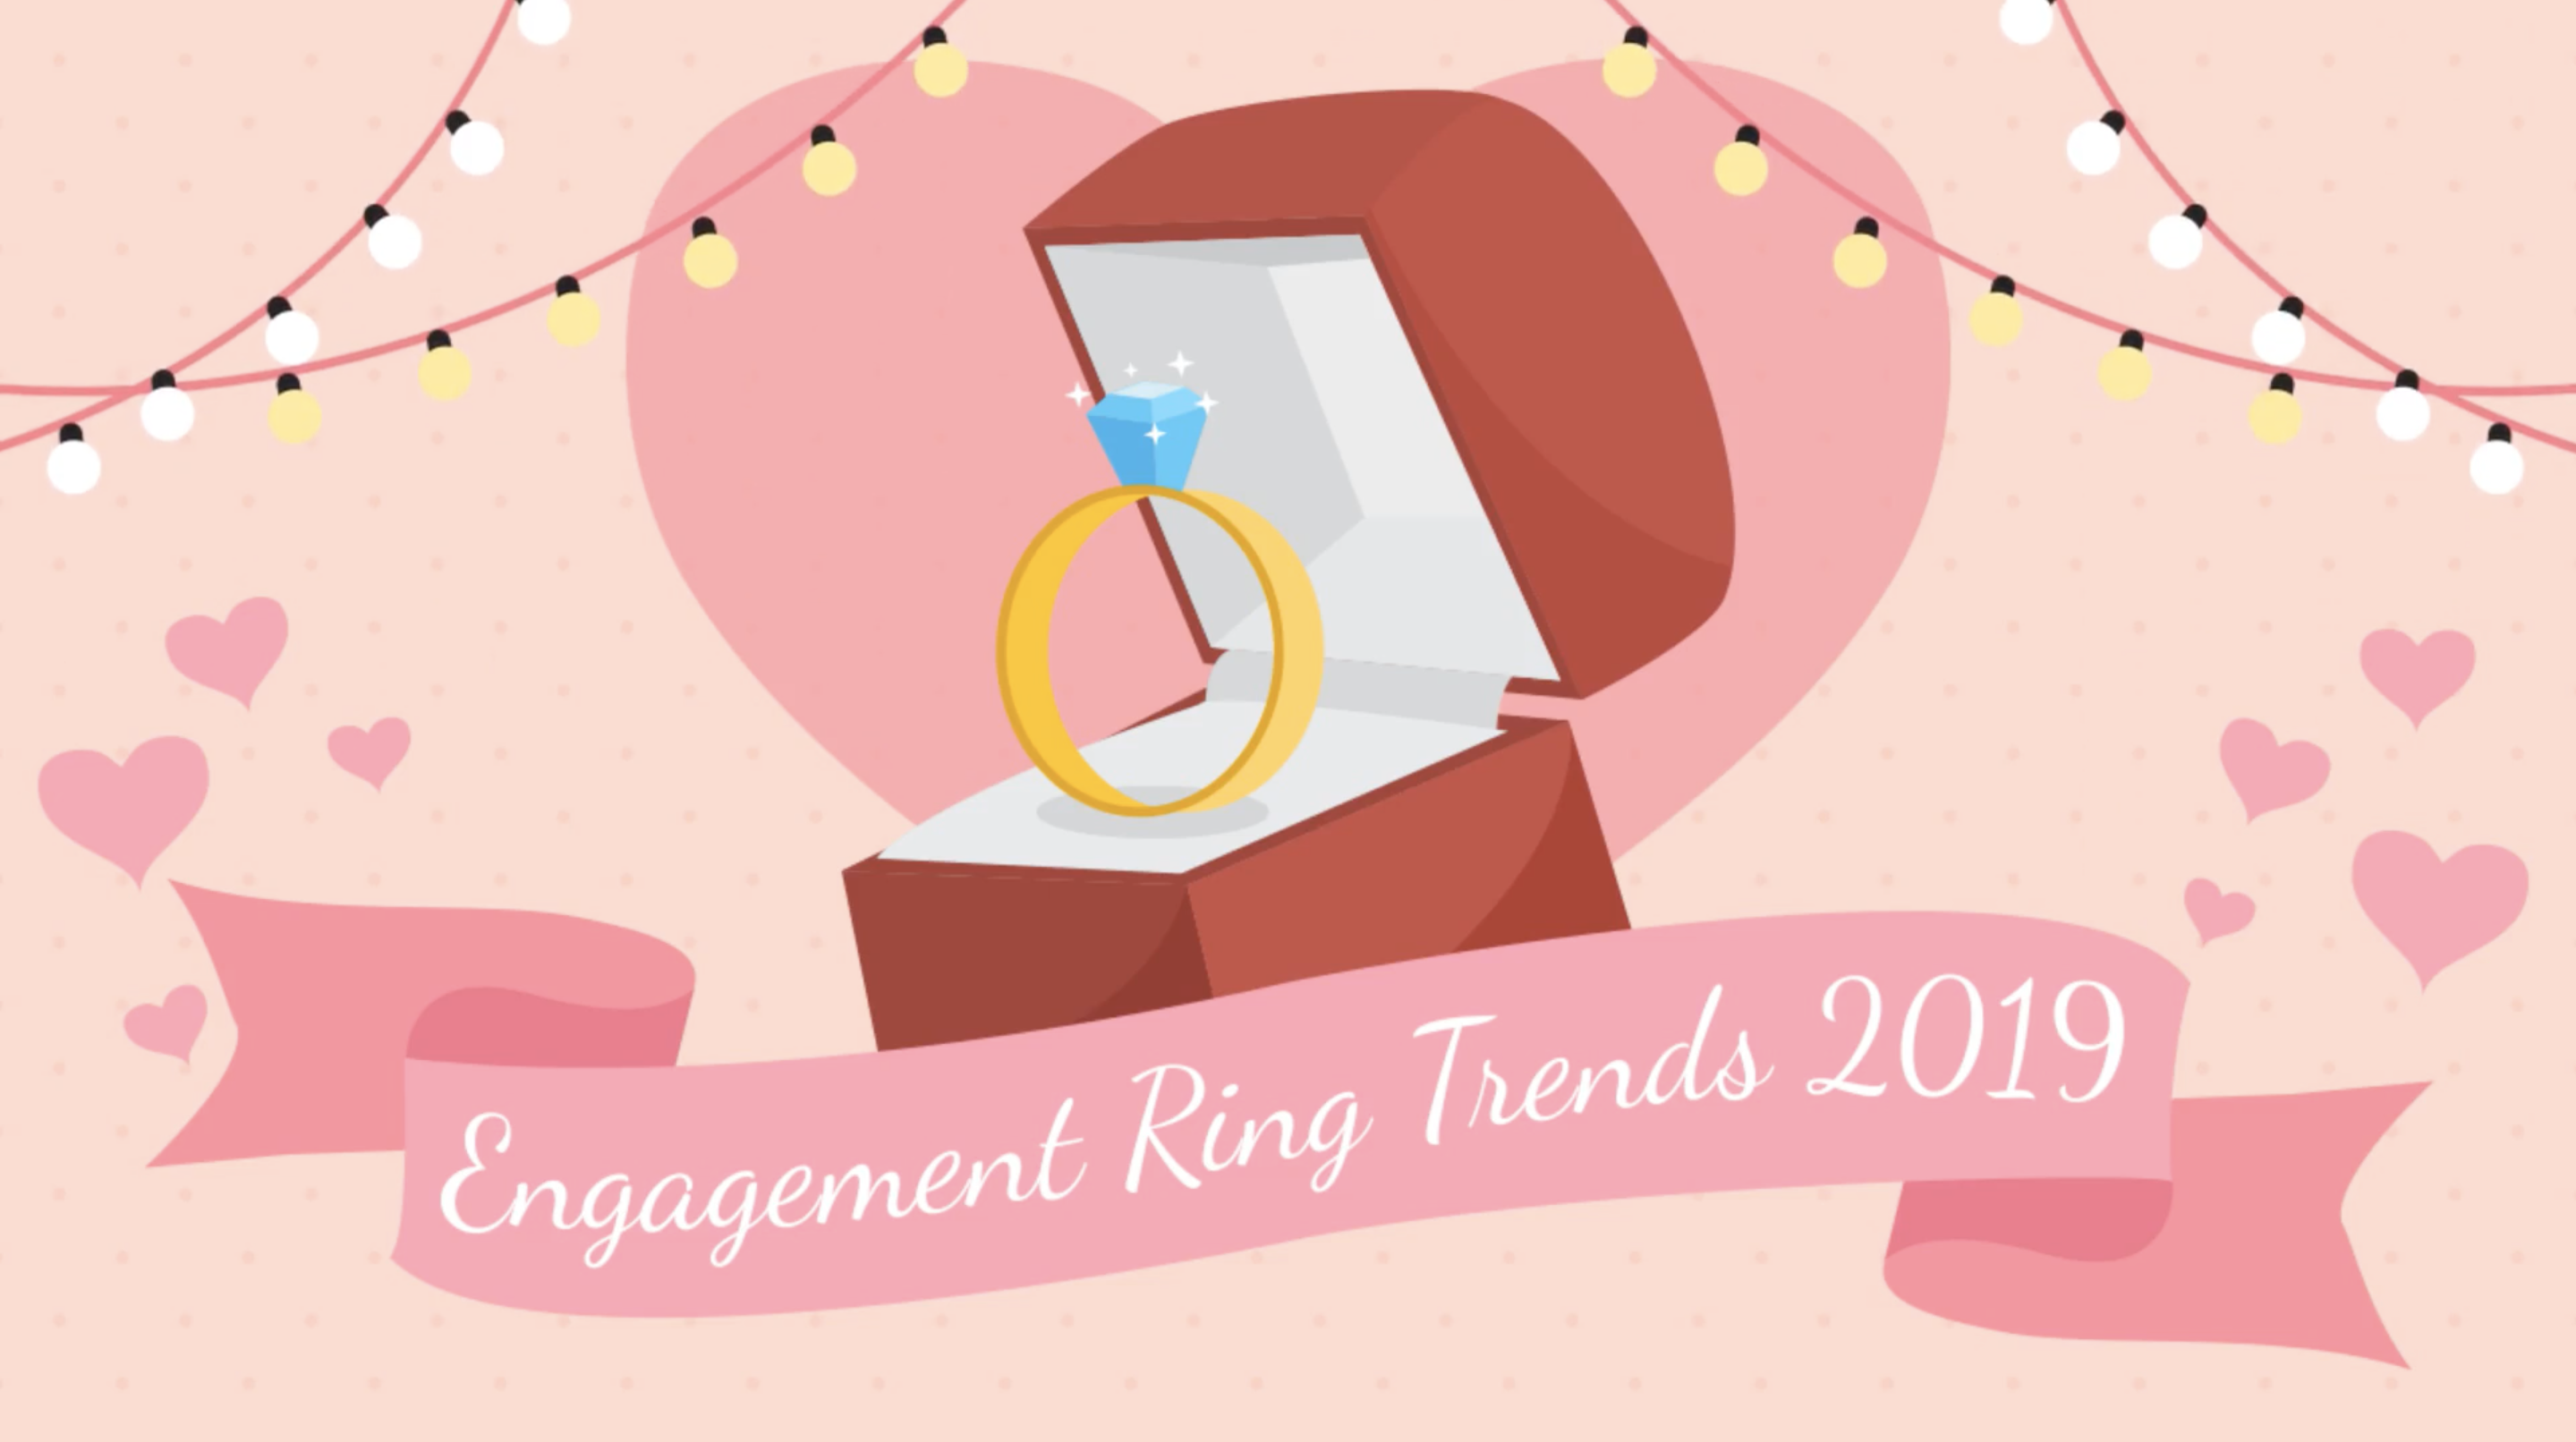 Engagement Ring Trends 2019